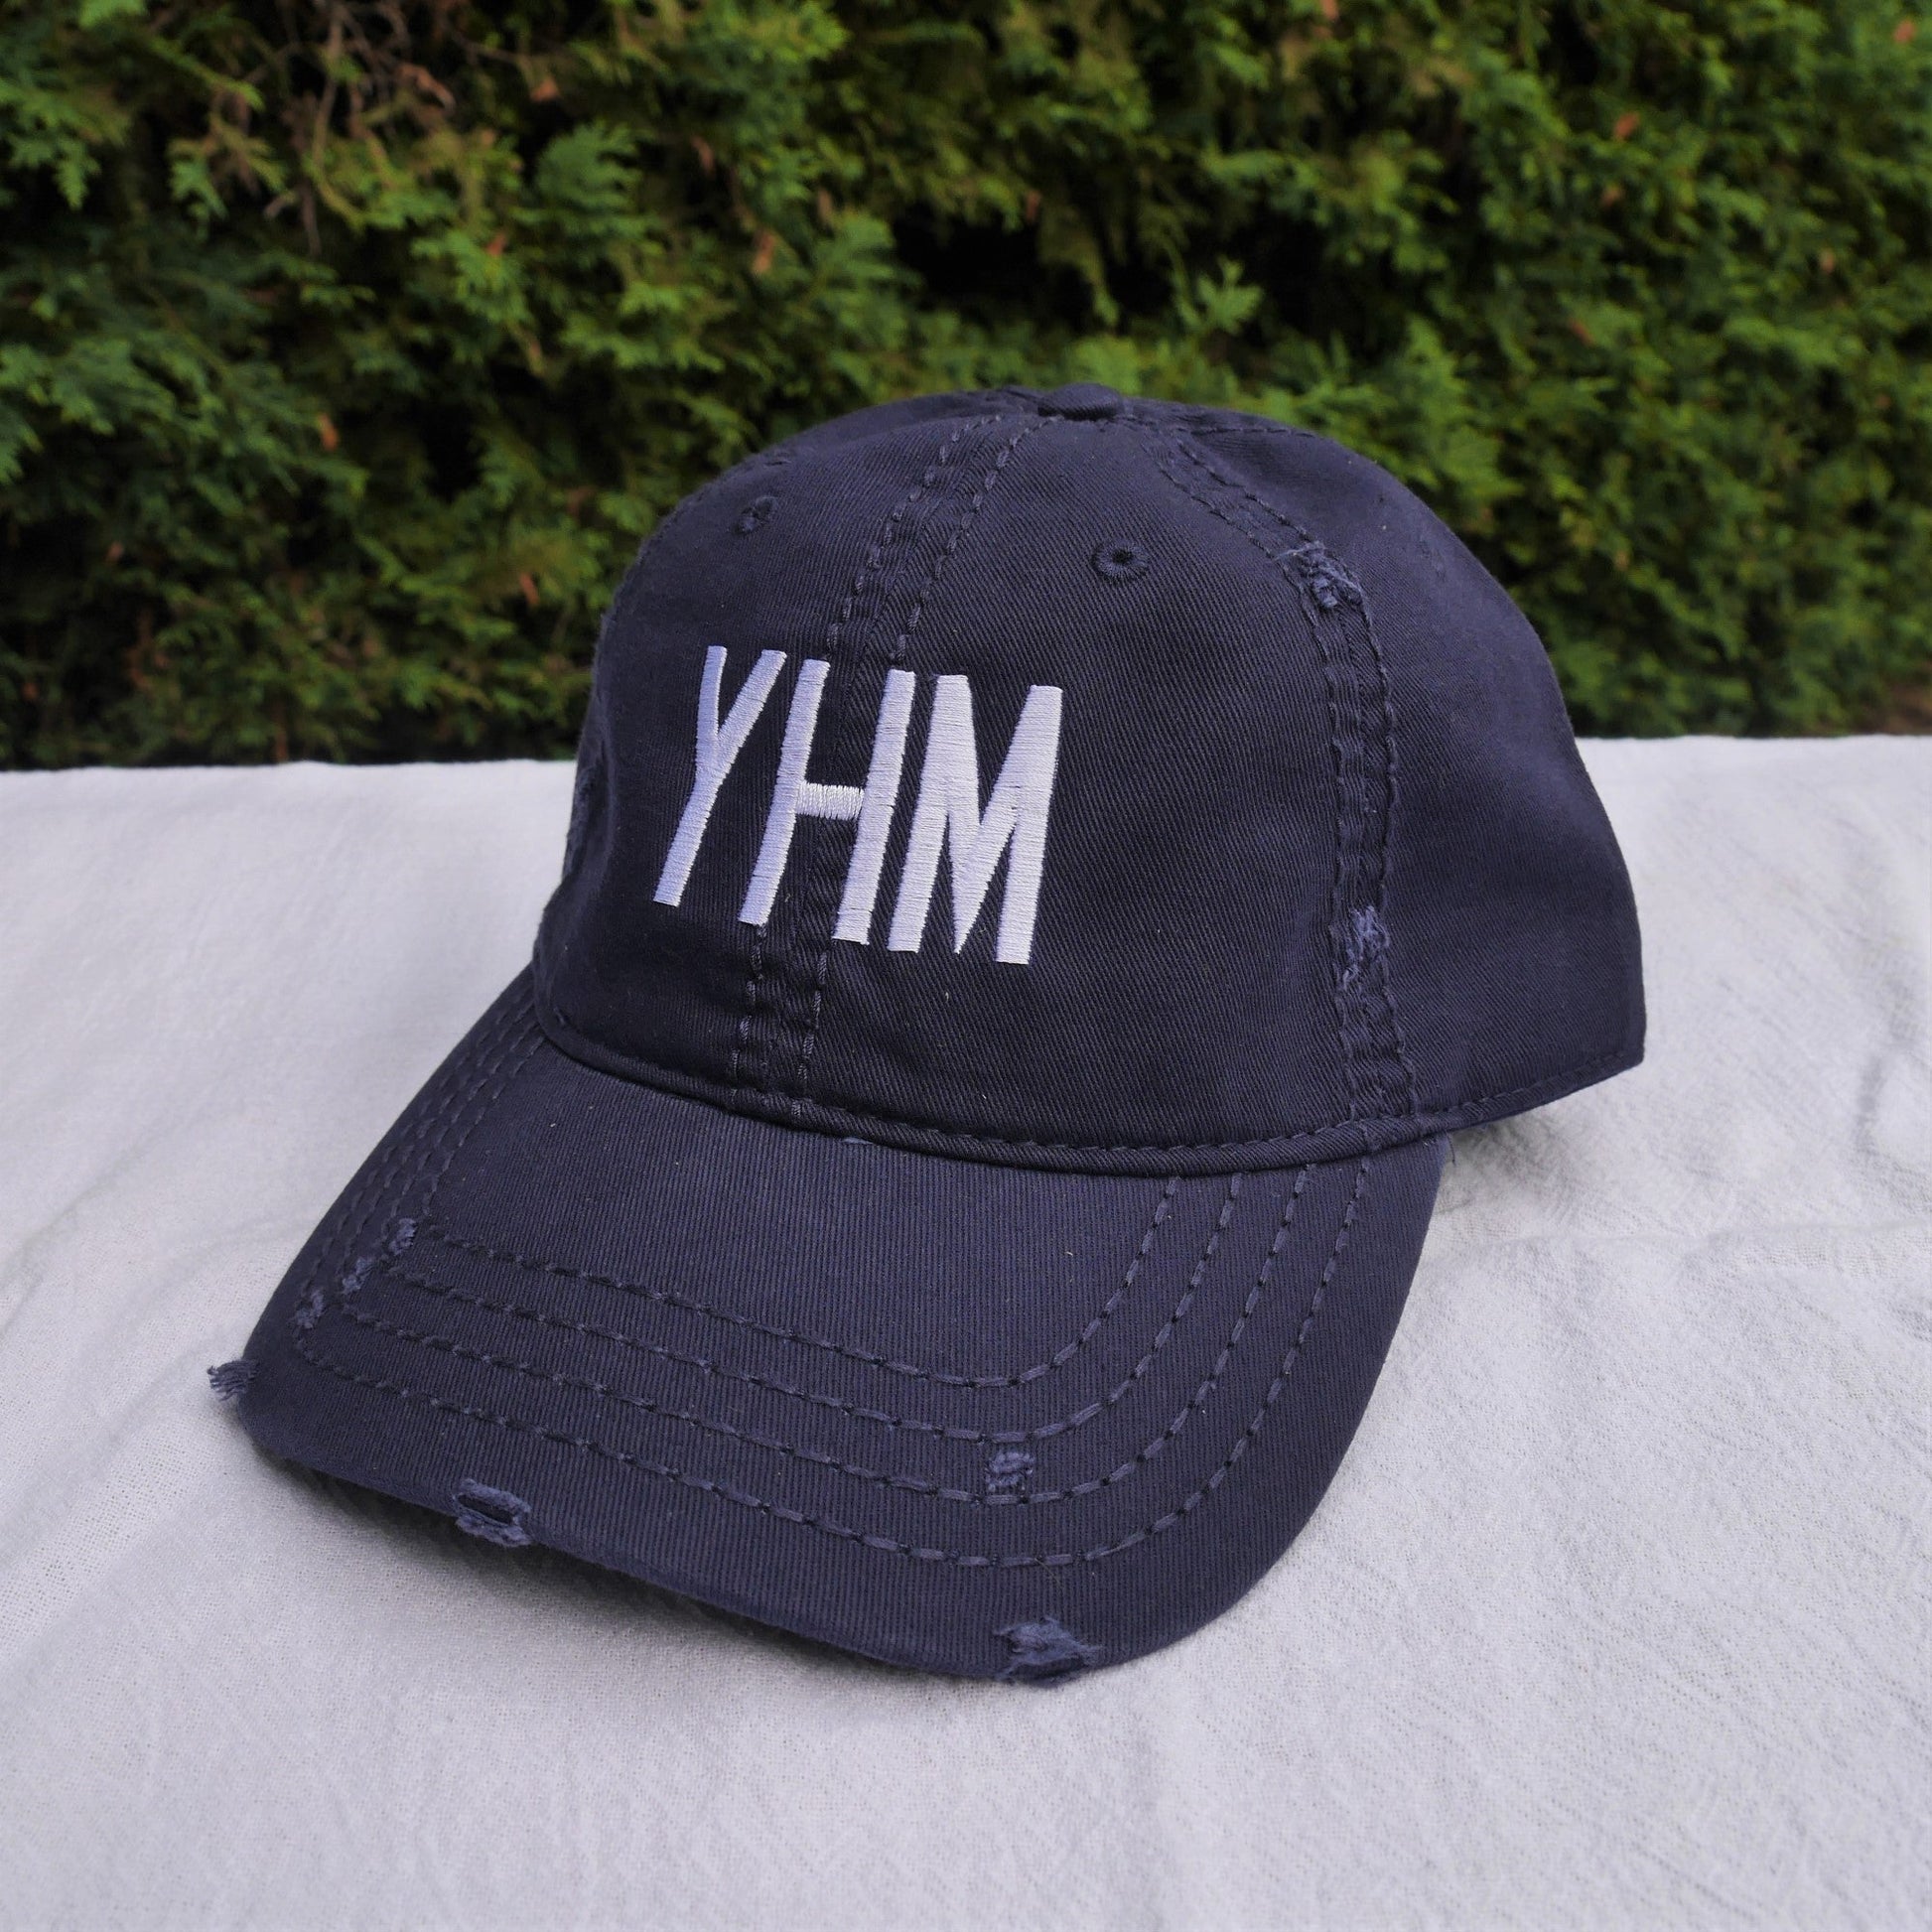 Airport Code Twill Cap - White • YMM Fort McMurray • YHM Designs - Image 34